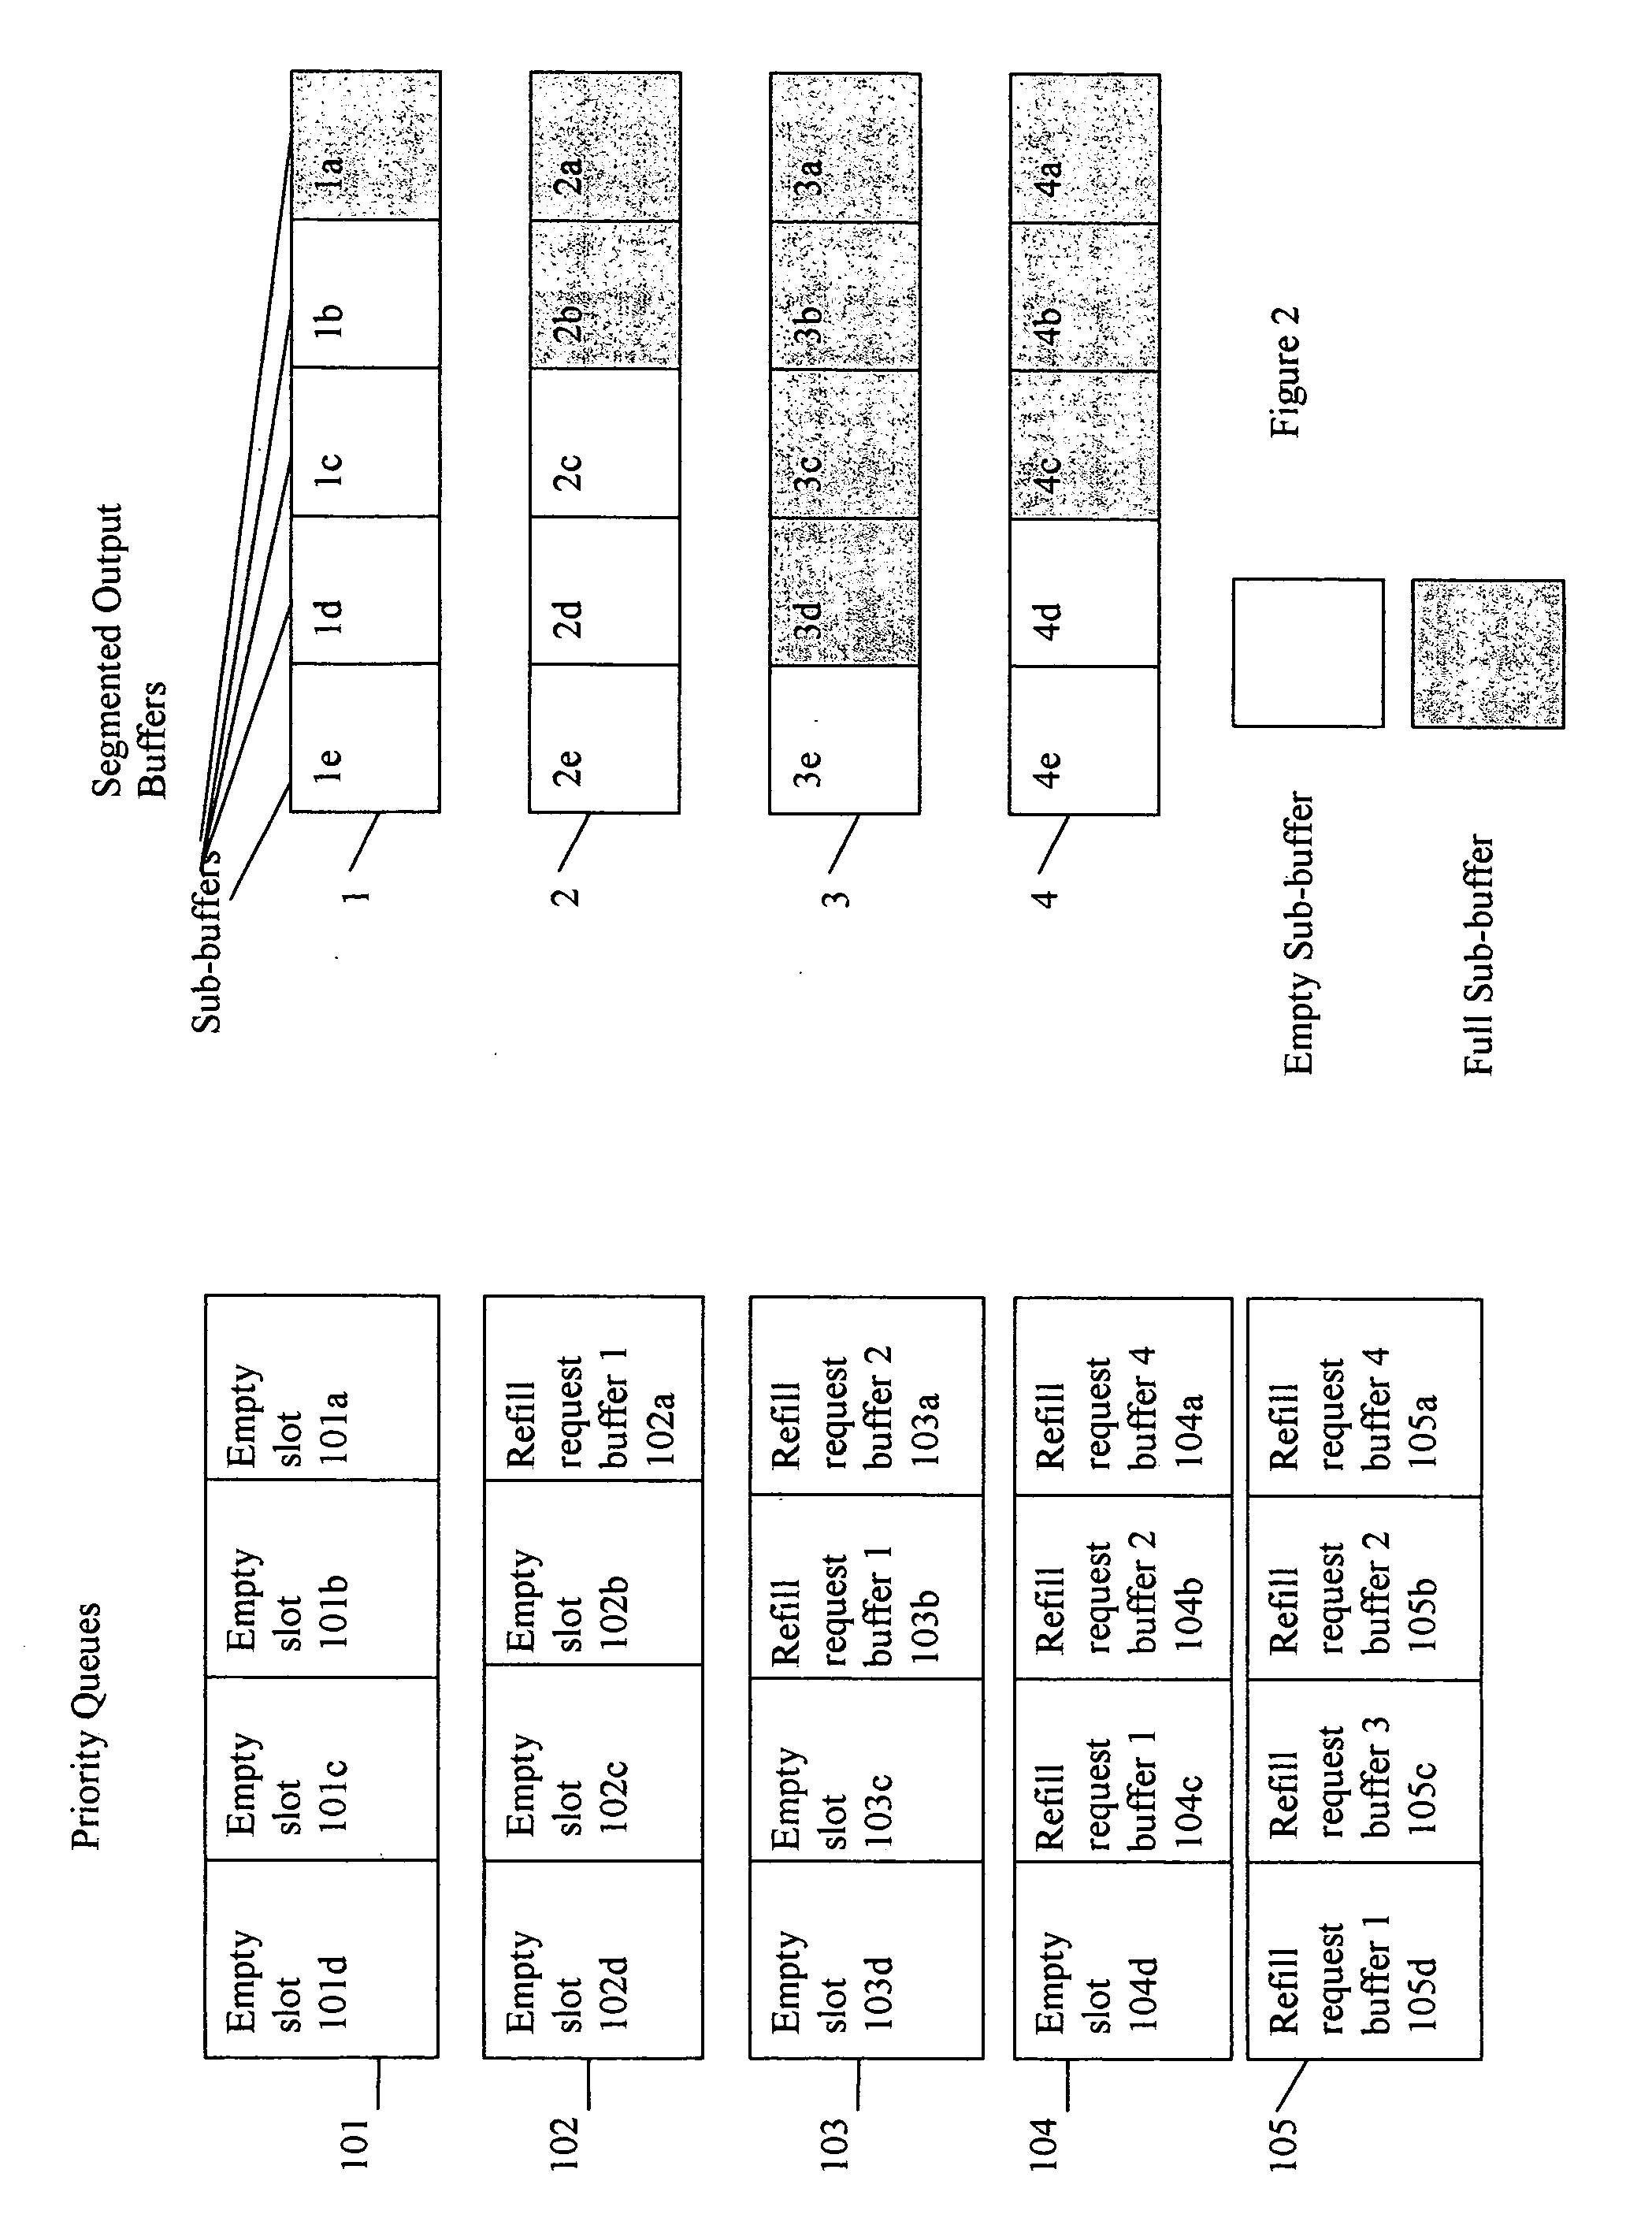 Apparatus and method for priority queuing with segmented buffers